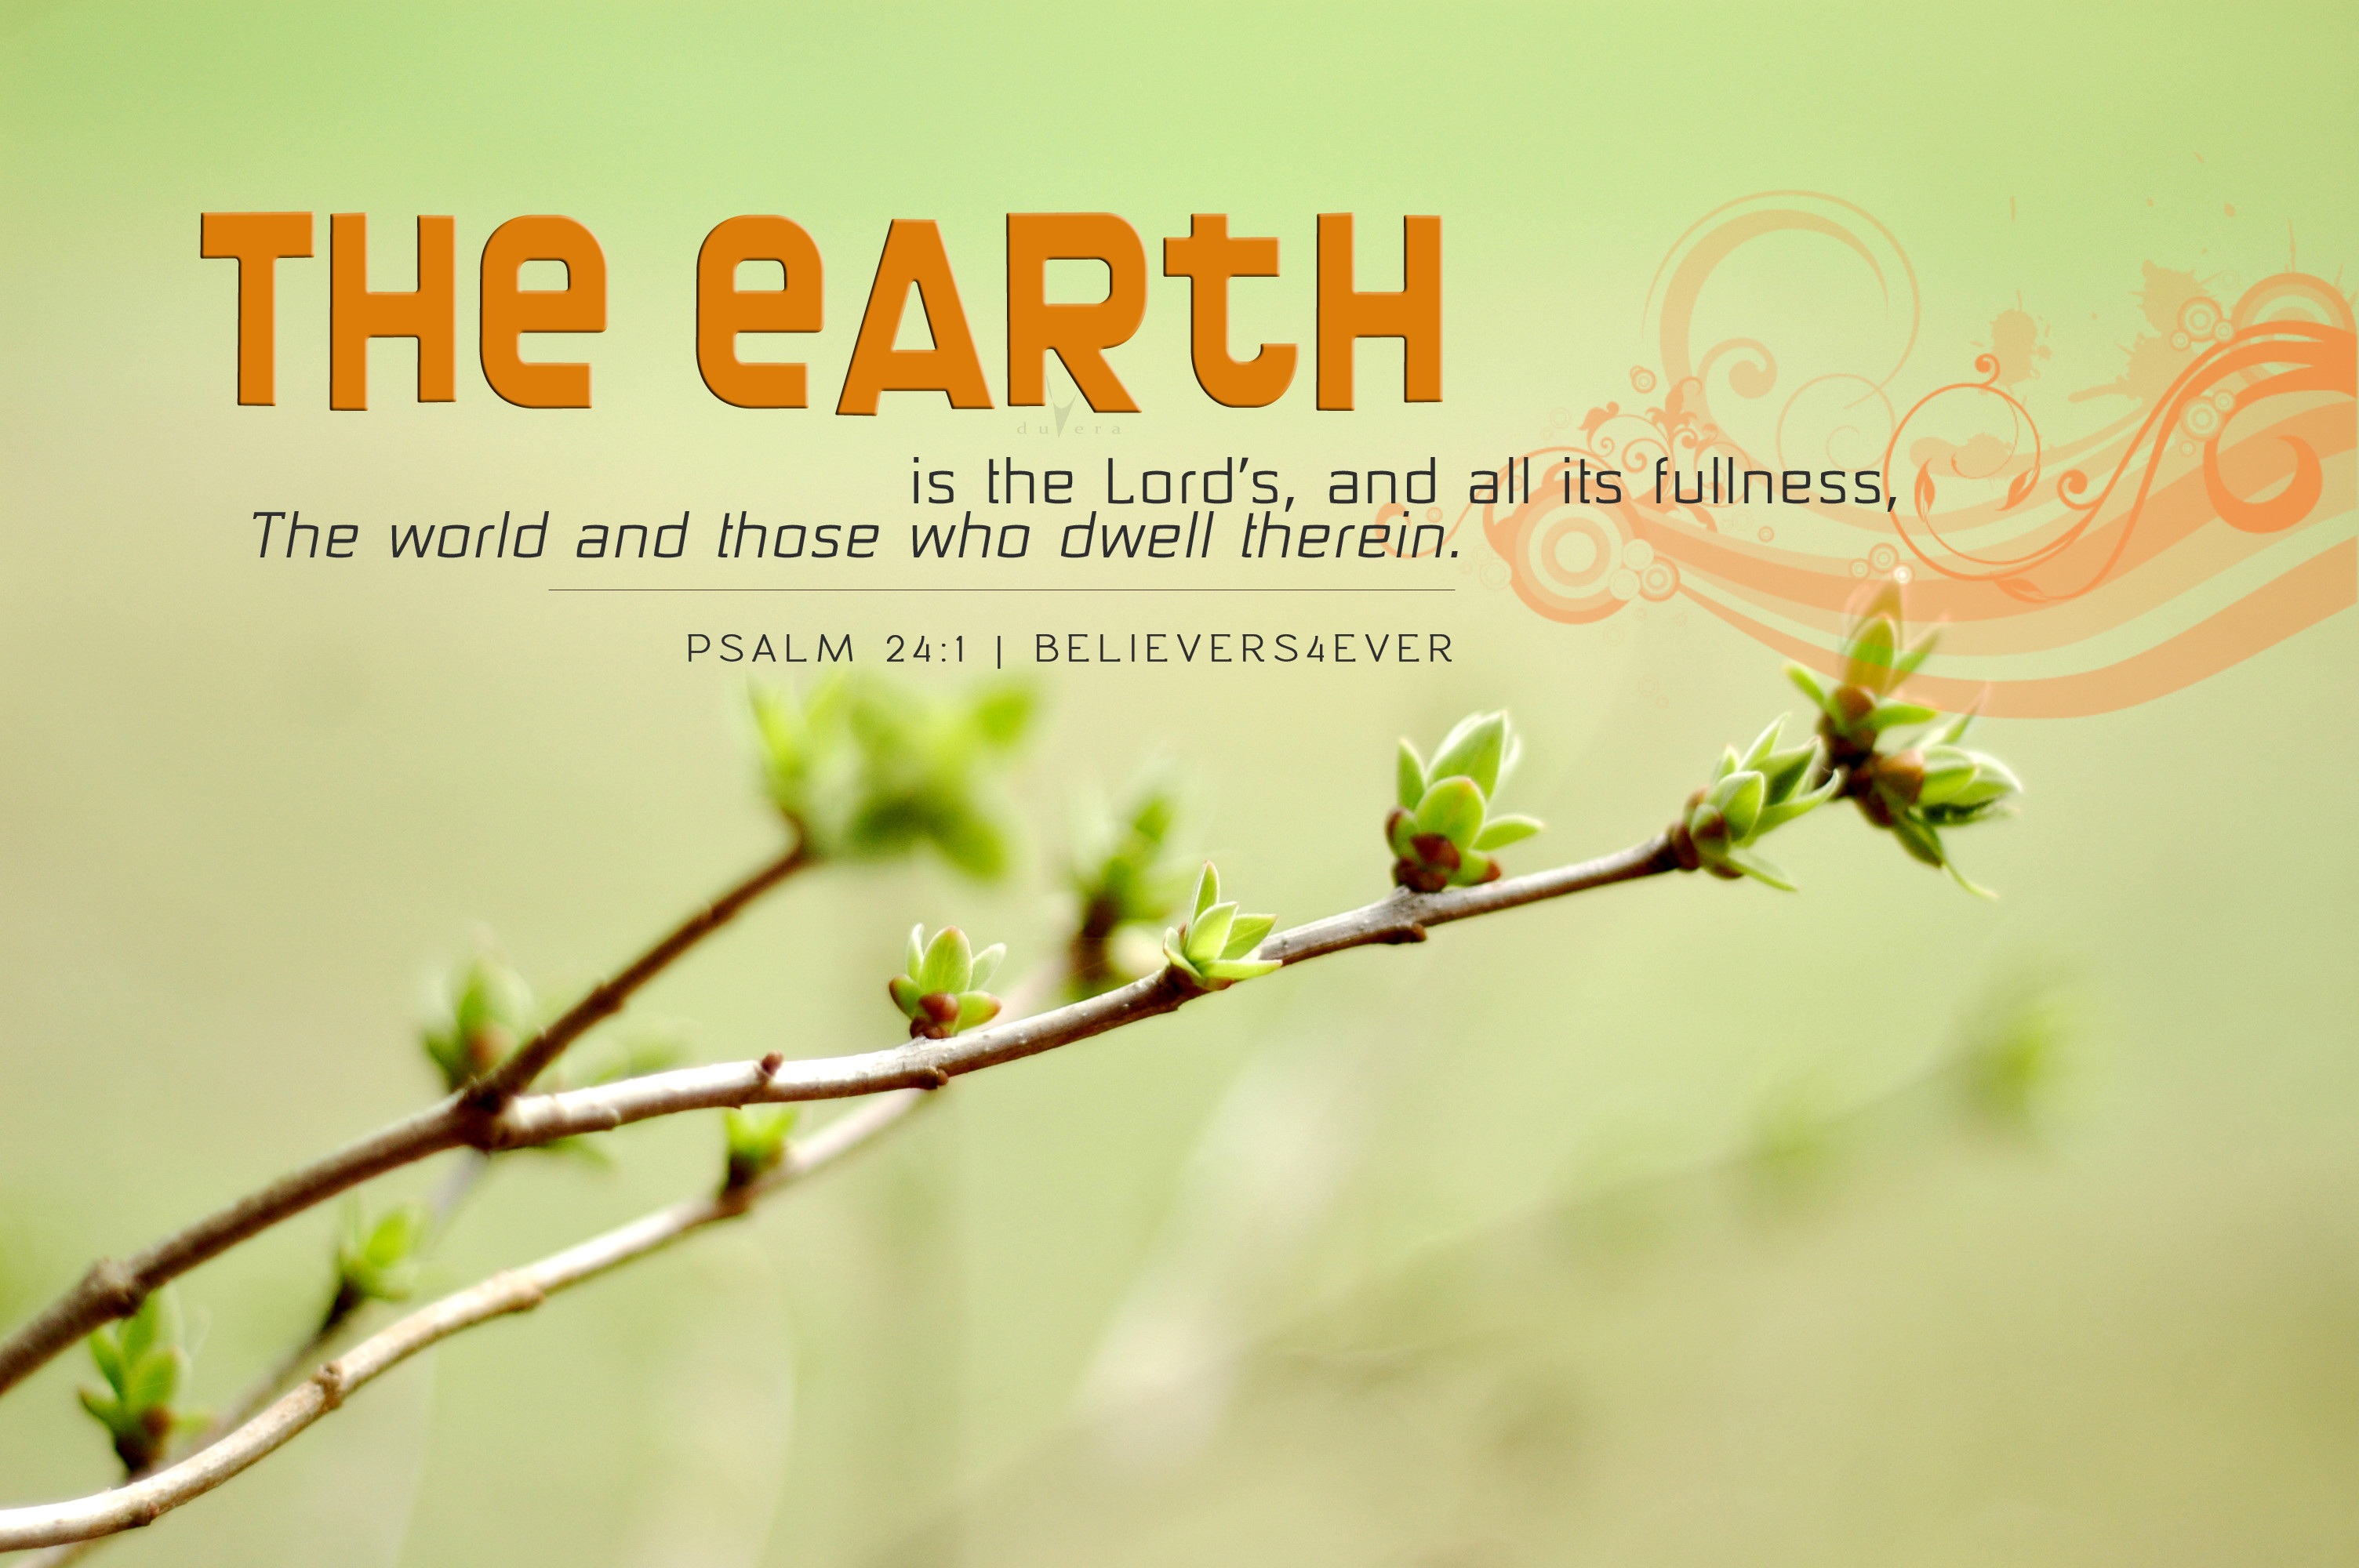 3008x2000 The earth is the Lord's